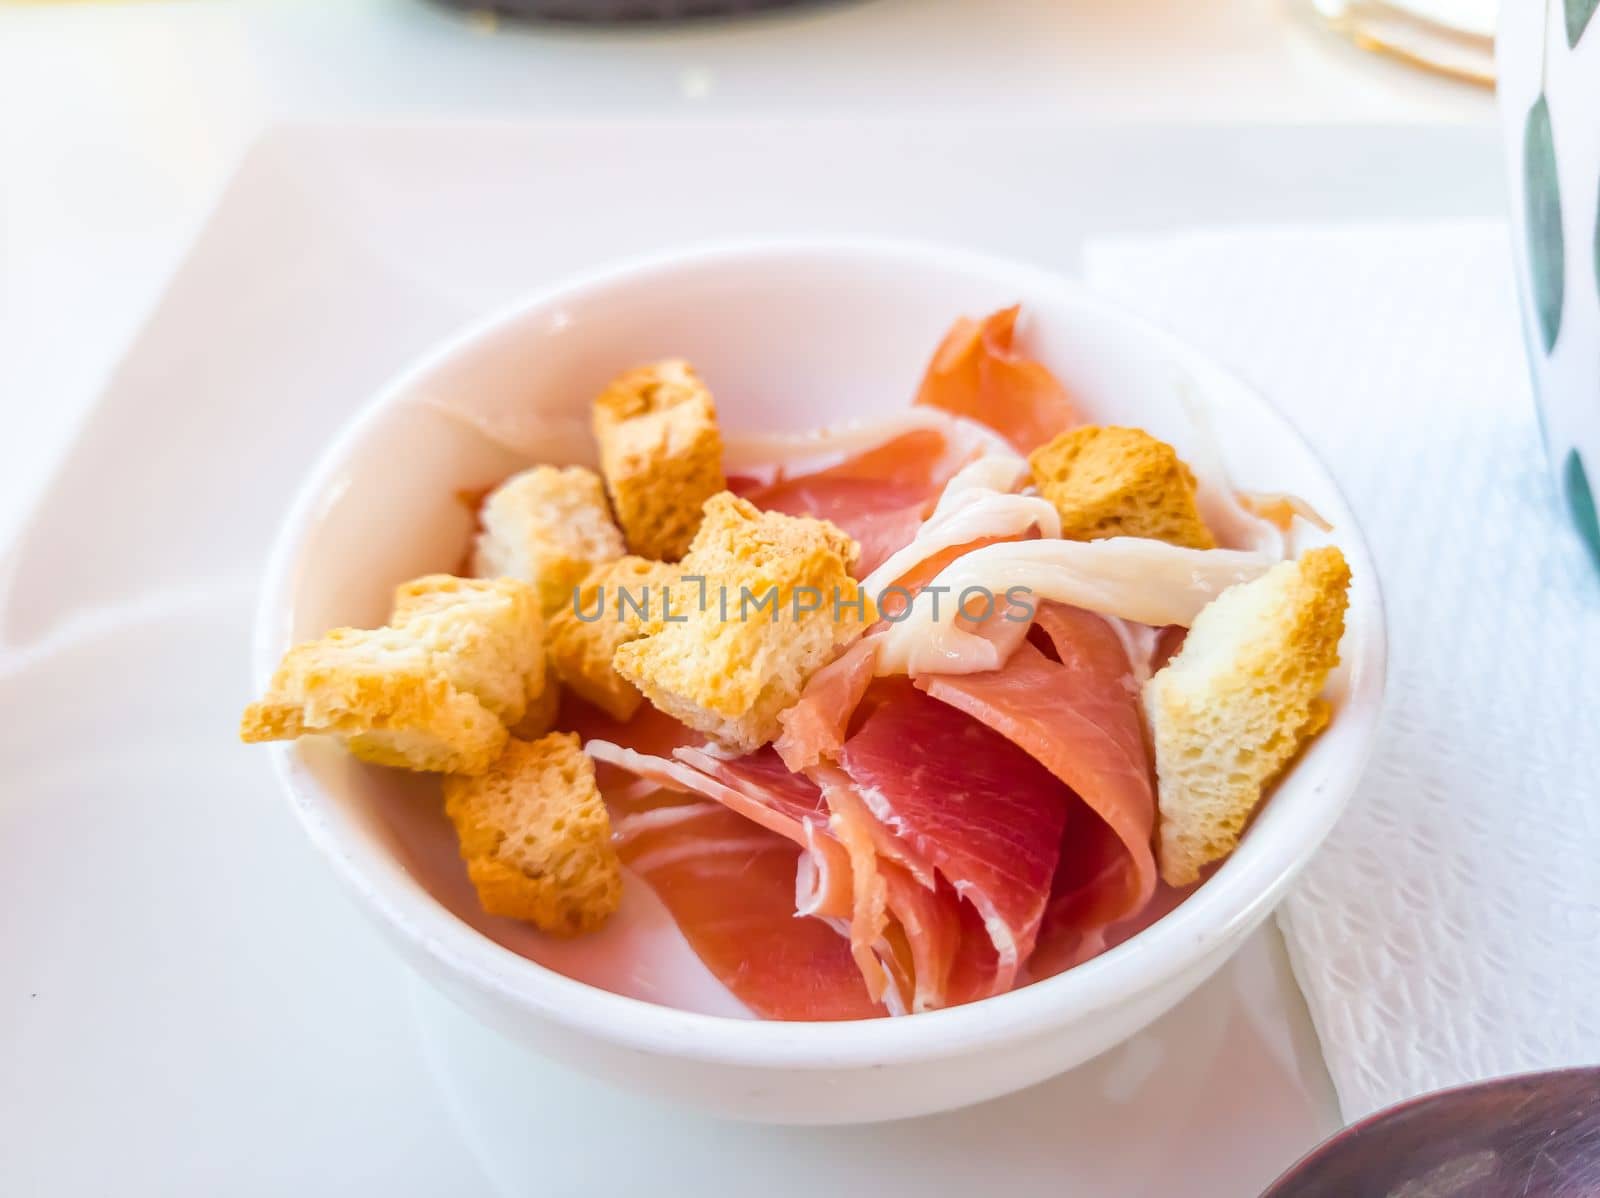 slices of jamon and croutons lie in a bowl for use in salad or soup by Milanchikov